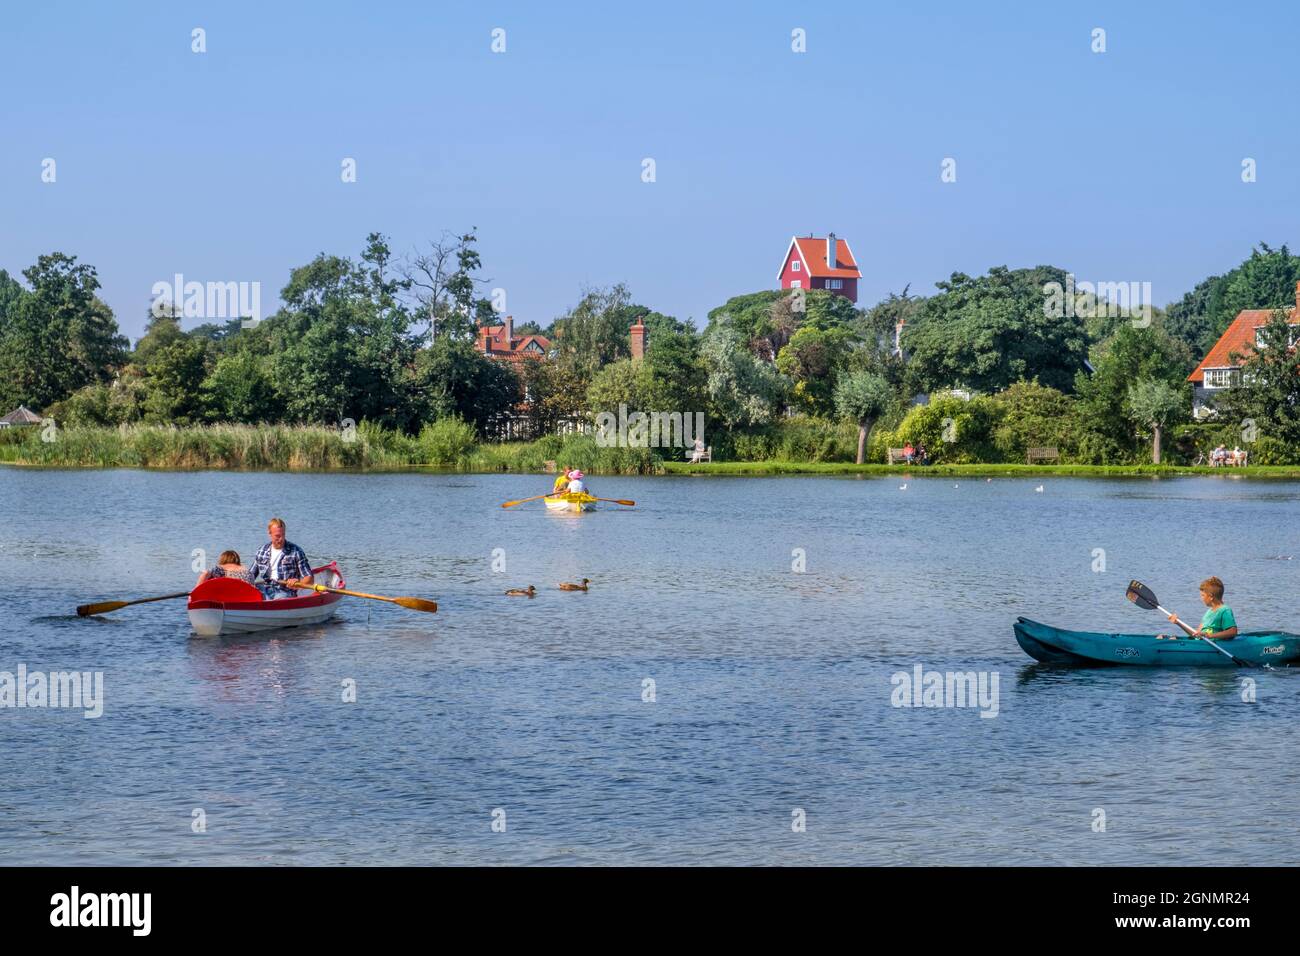 Boating on Thorpeness Meare, Thorpeness, Suffolk, UK. Stock Photo